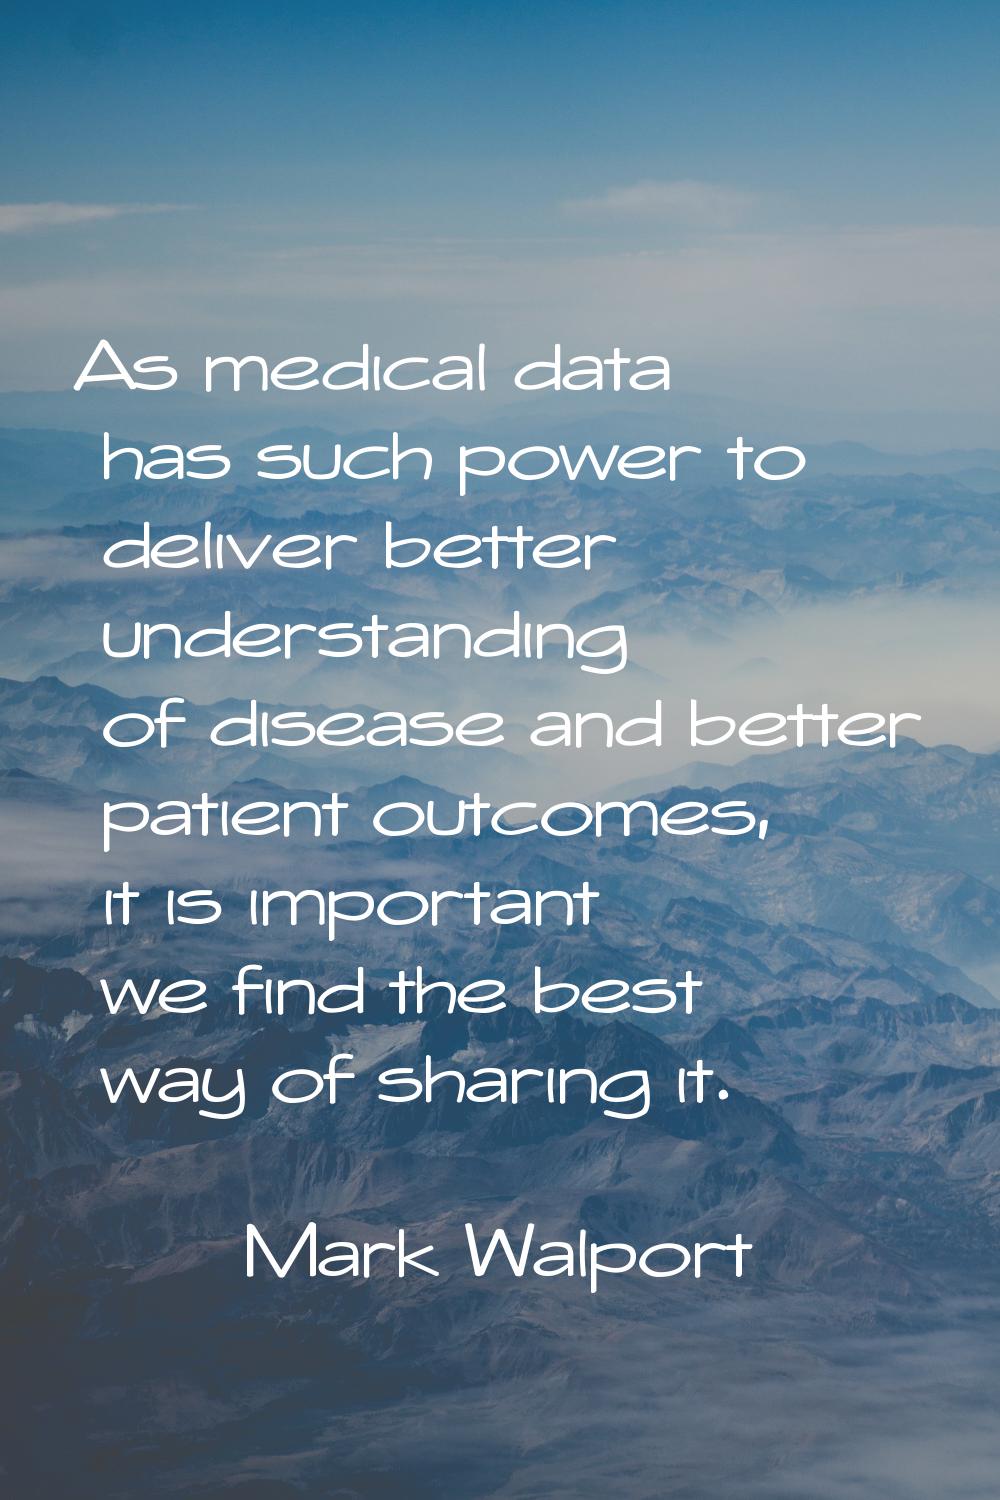 As medical data has such power to deliver better understanding of disease and better patient outcom